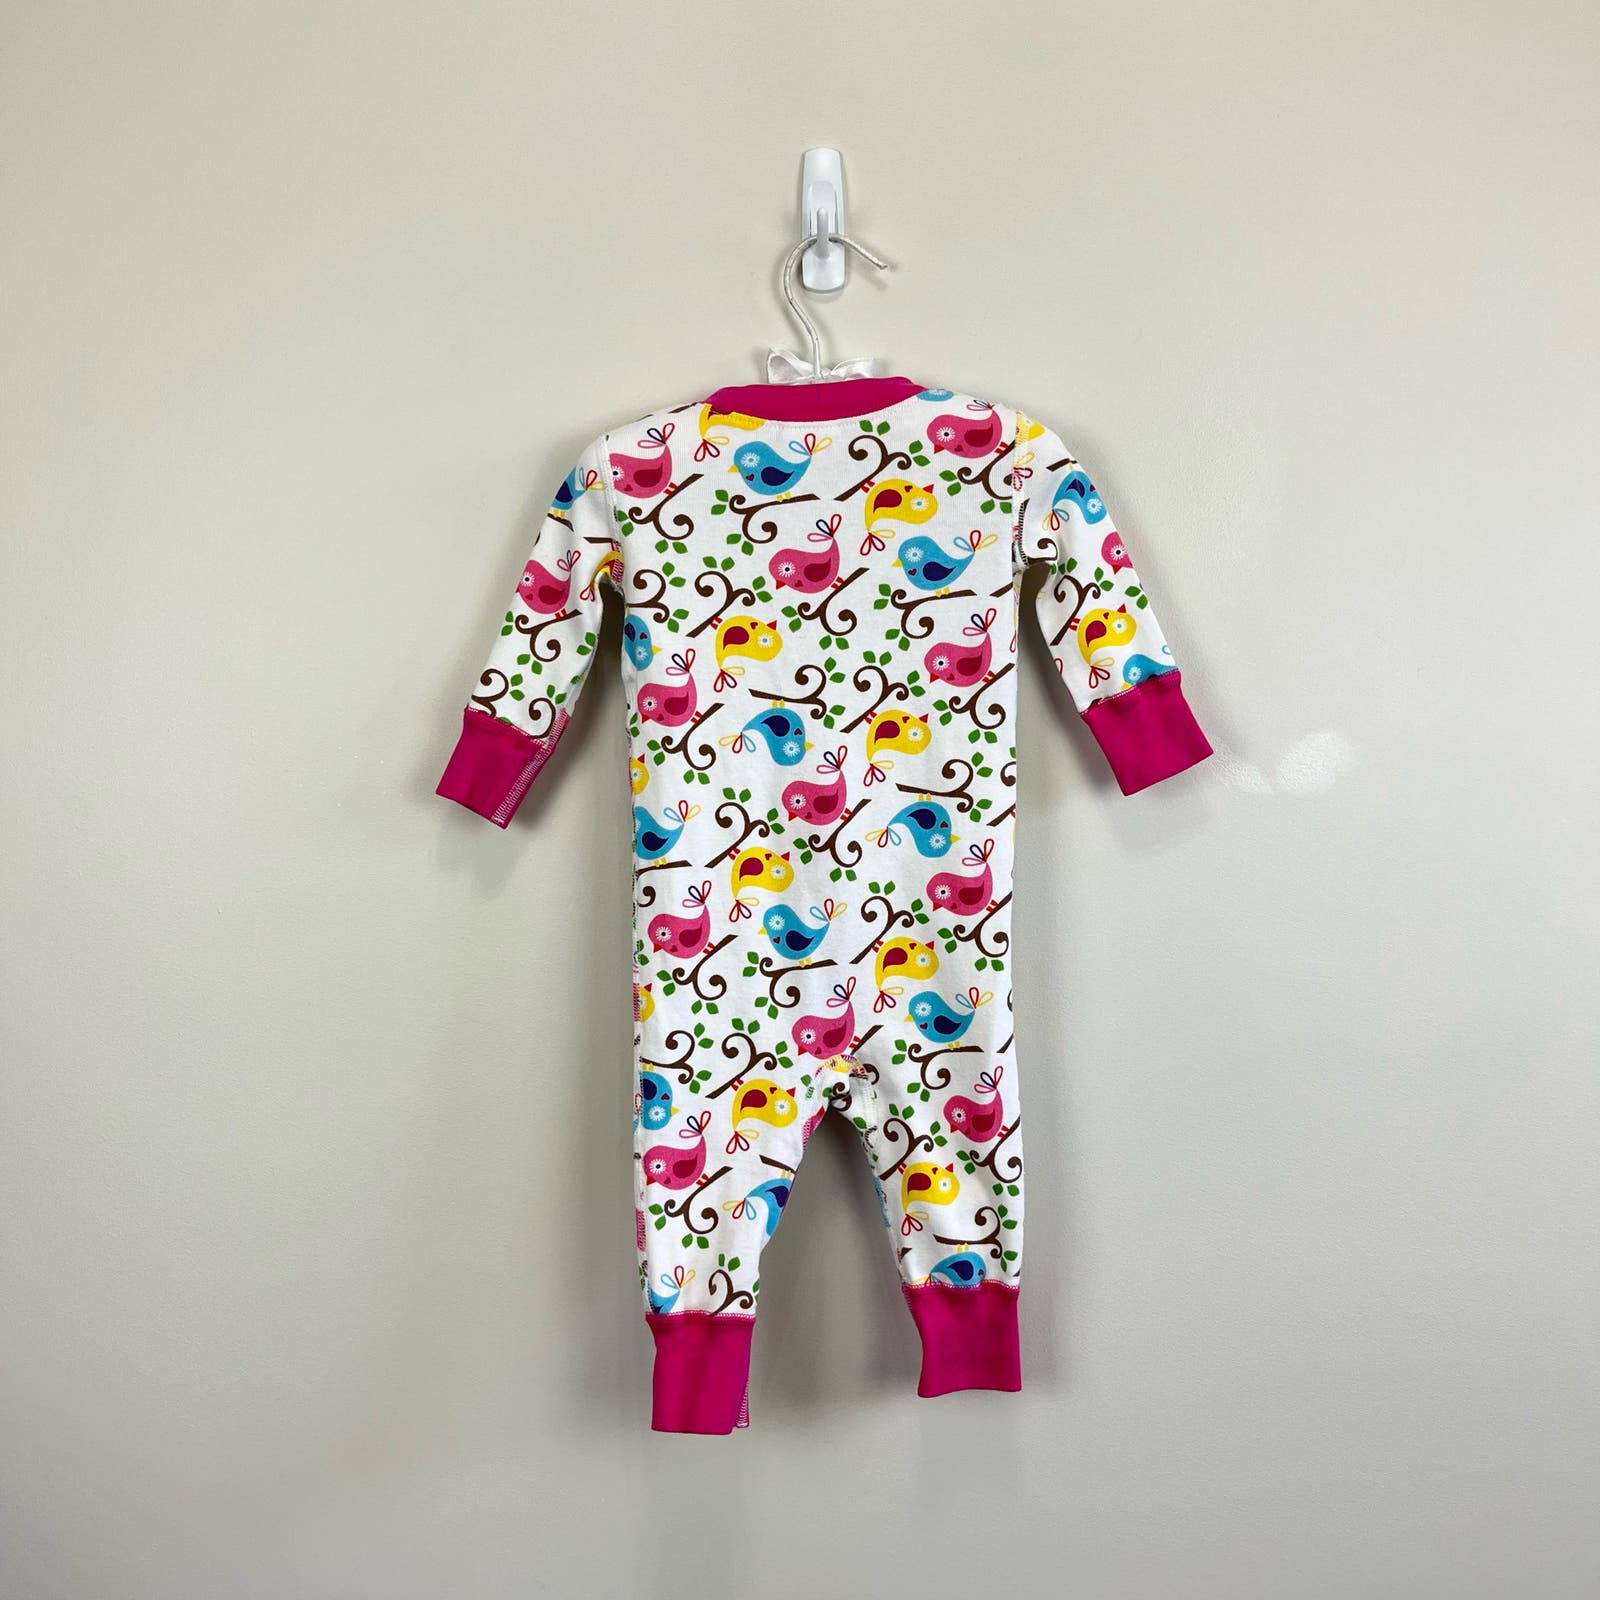 Hanna Andersson Colorful Bird Pajamas 60 cm (6-9 Months)